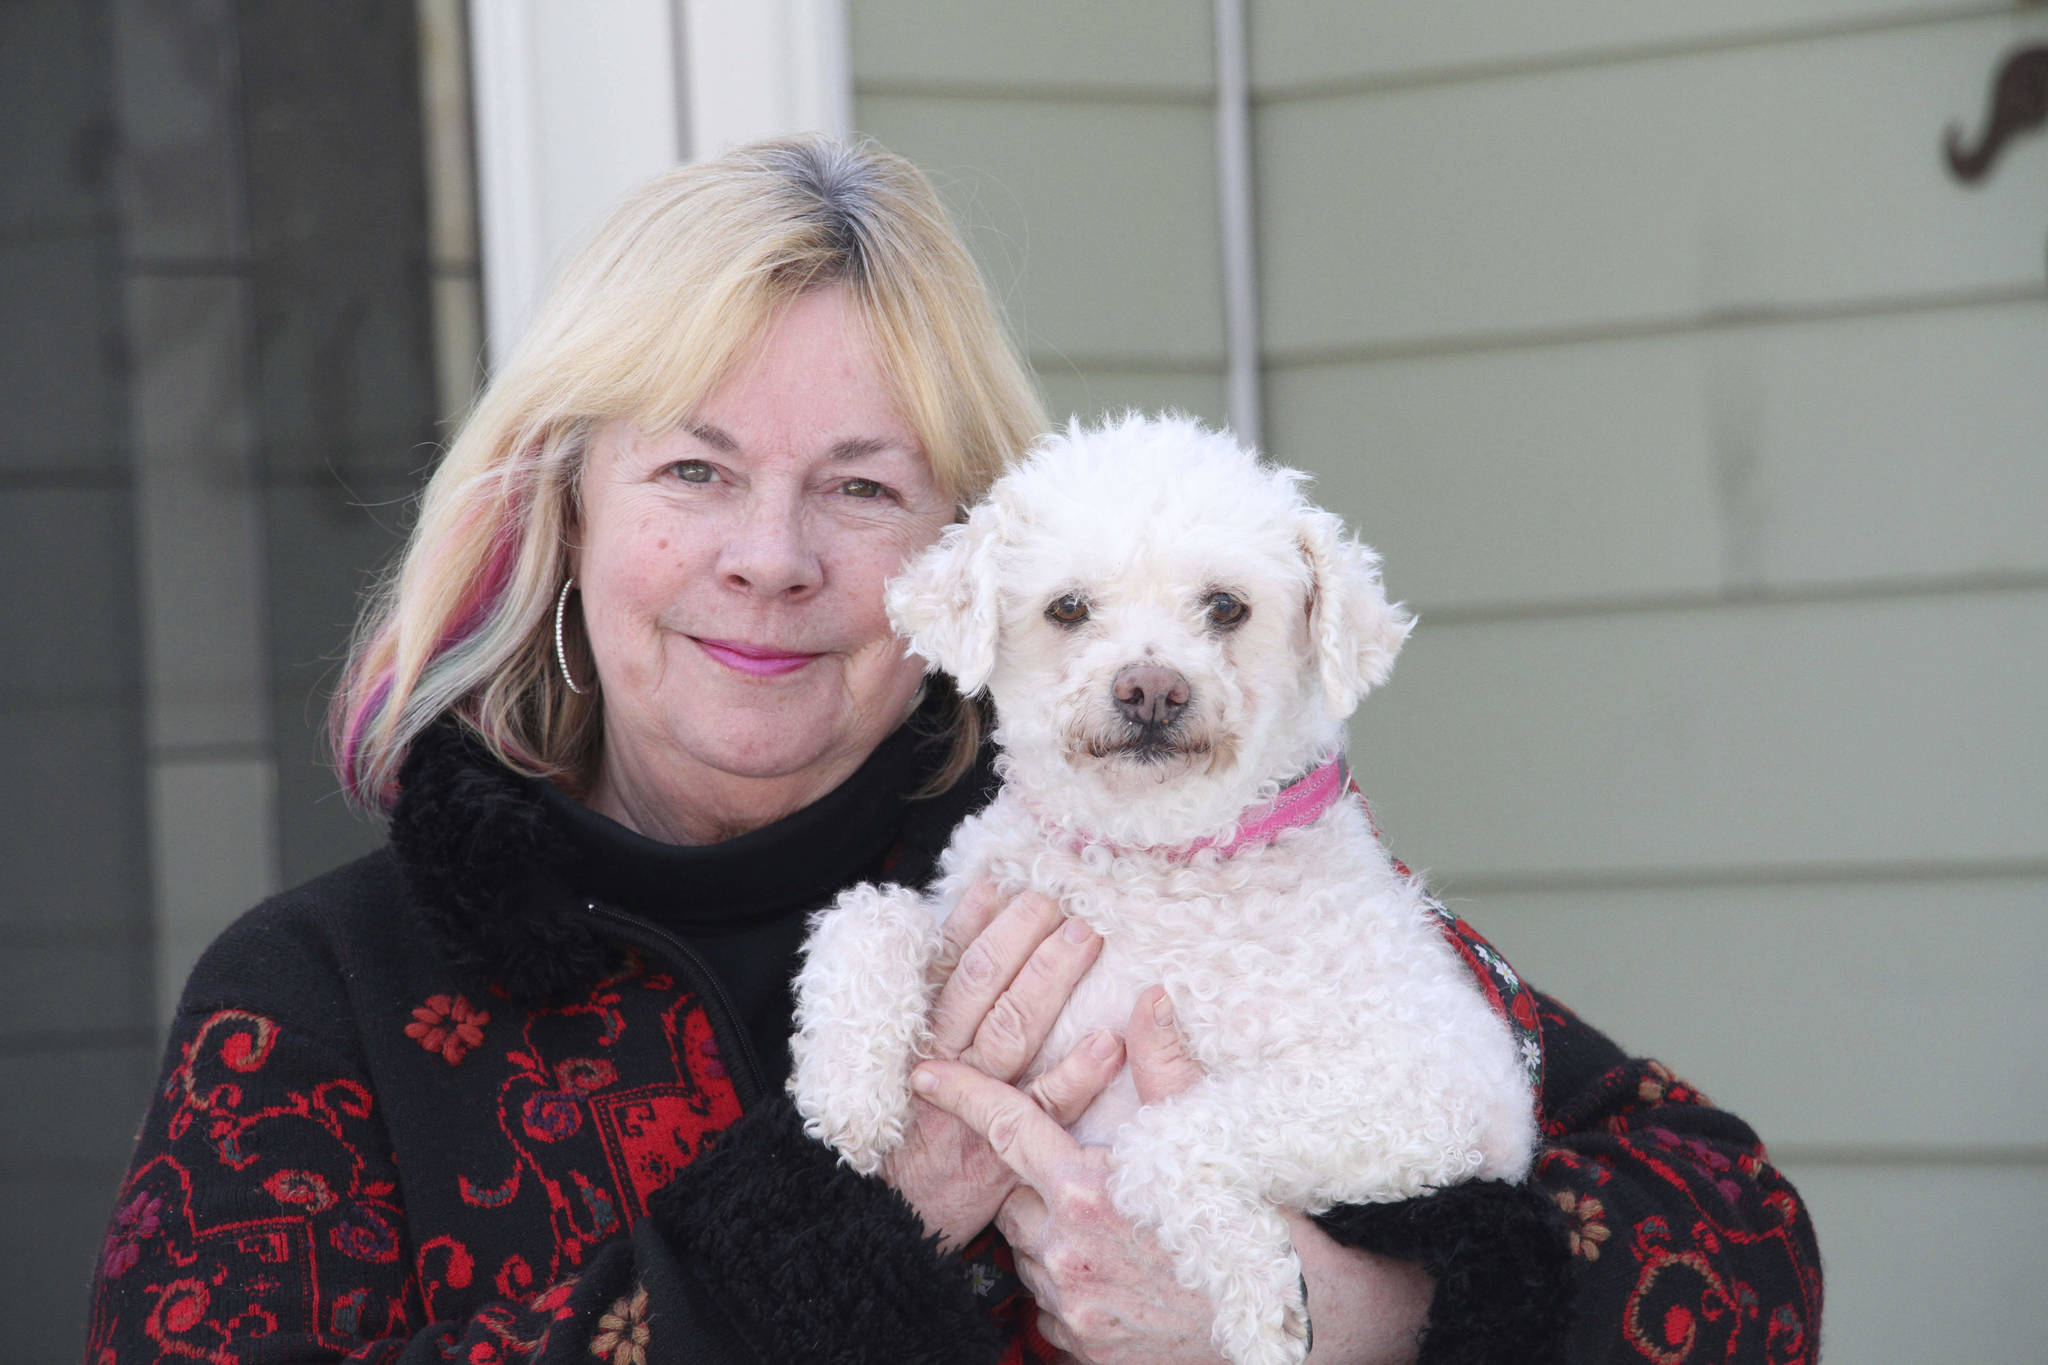 In this March 26, 2020, photo, Ina Pizzolato Offret is shown with Kelsey, a dog she and her husband, Ron, are fostering at their home in Anchorage, Alaska. Worried that the coronavirus outbreak would cause animal adoptions to plunge, shelters across the country put out the call for people to temporarily foster pets. (AP Photo/Mark Thiessen)